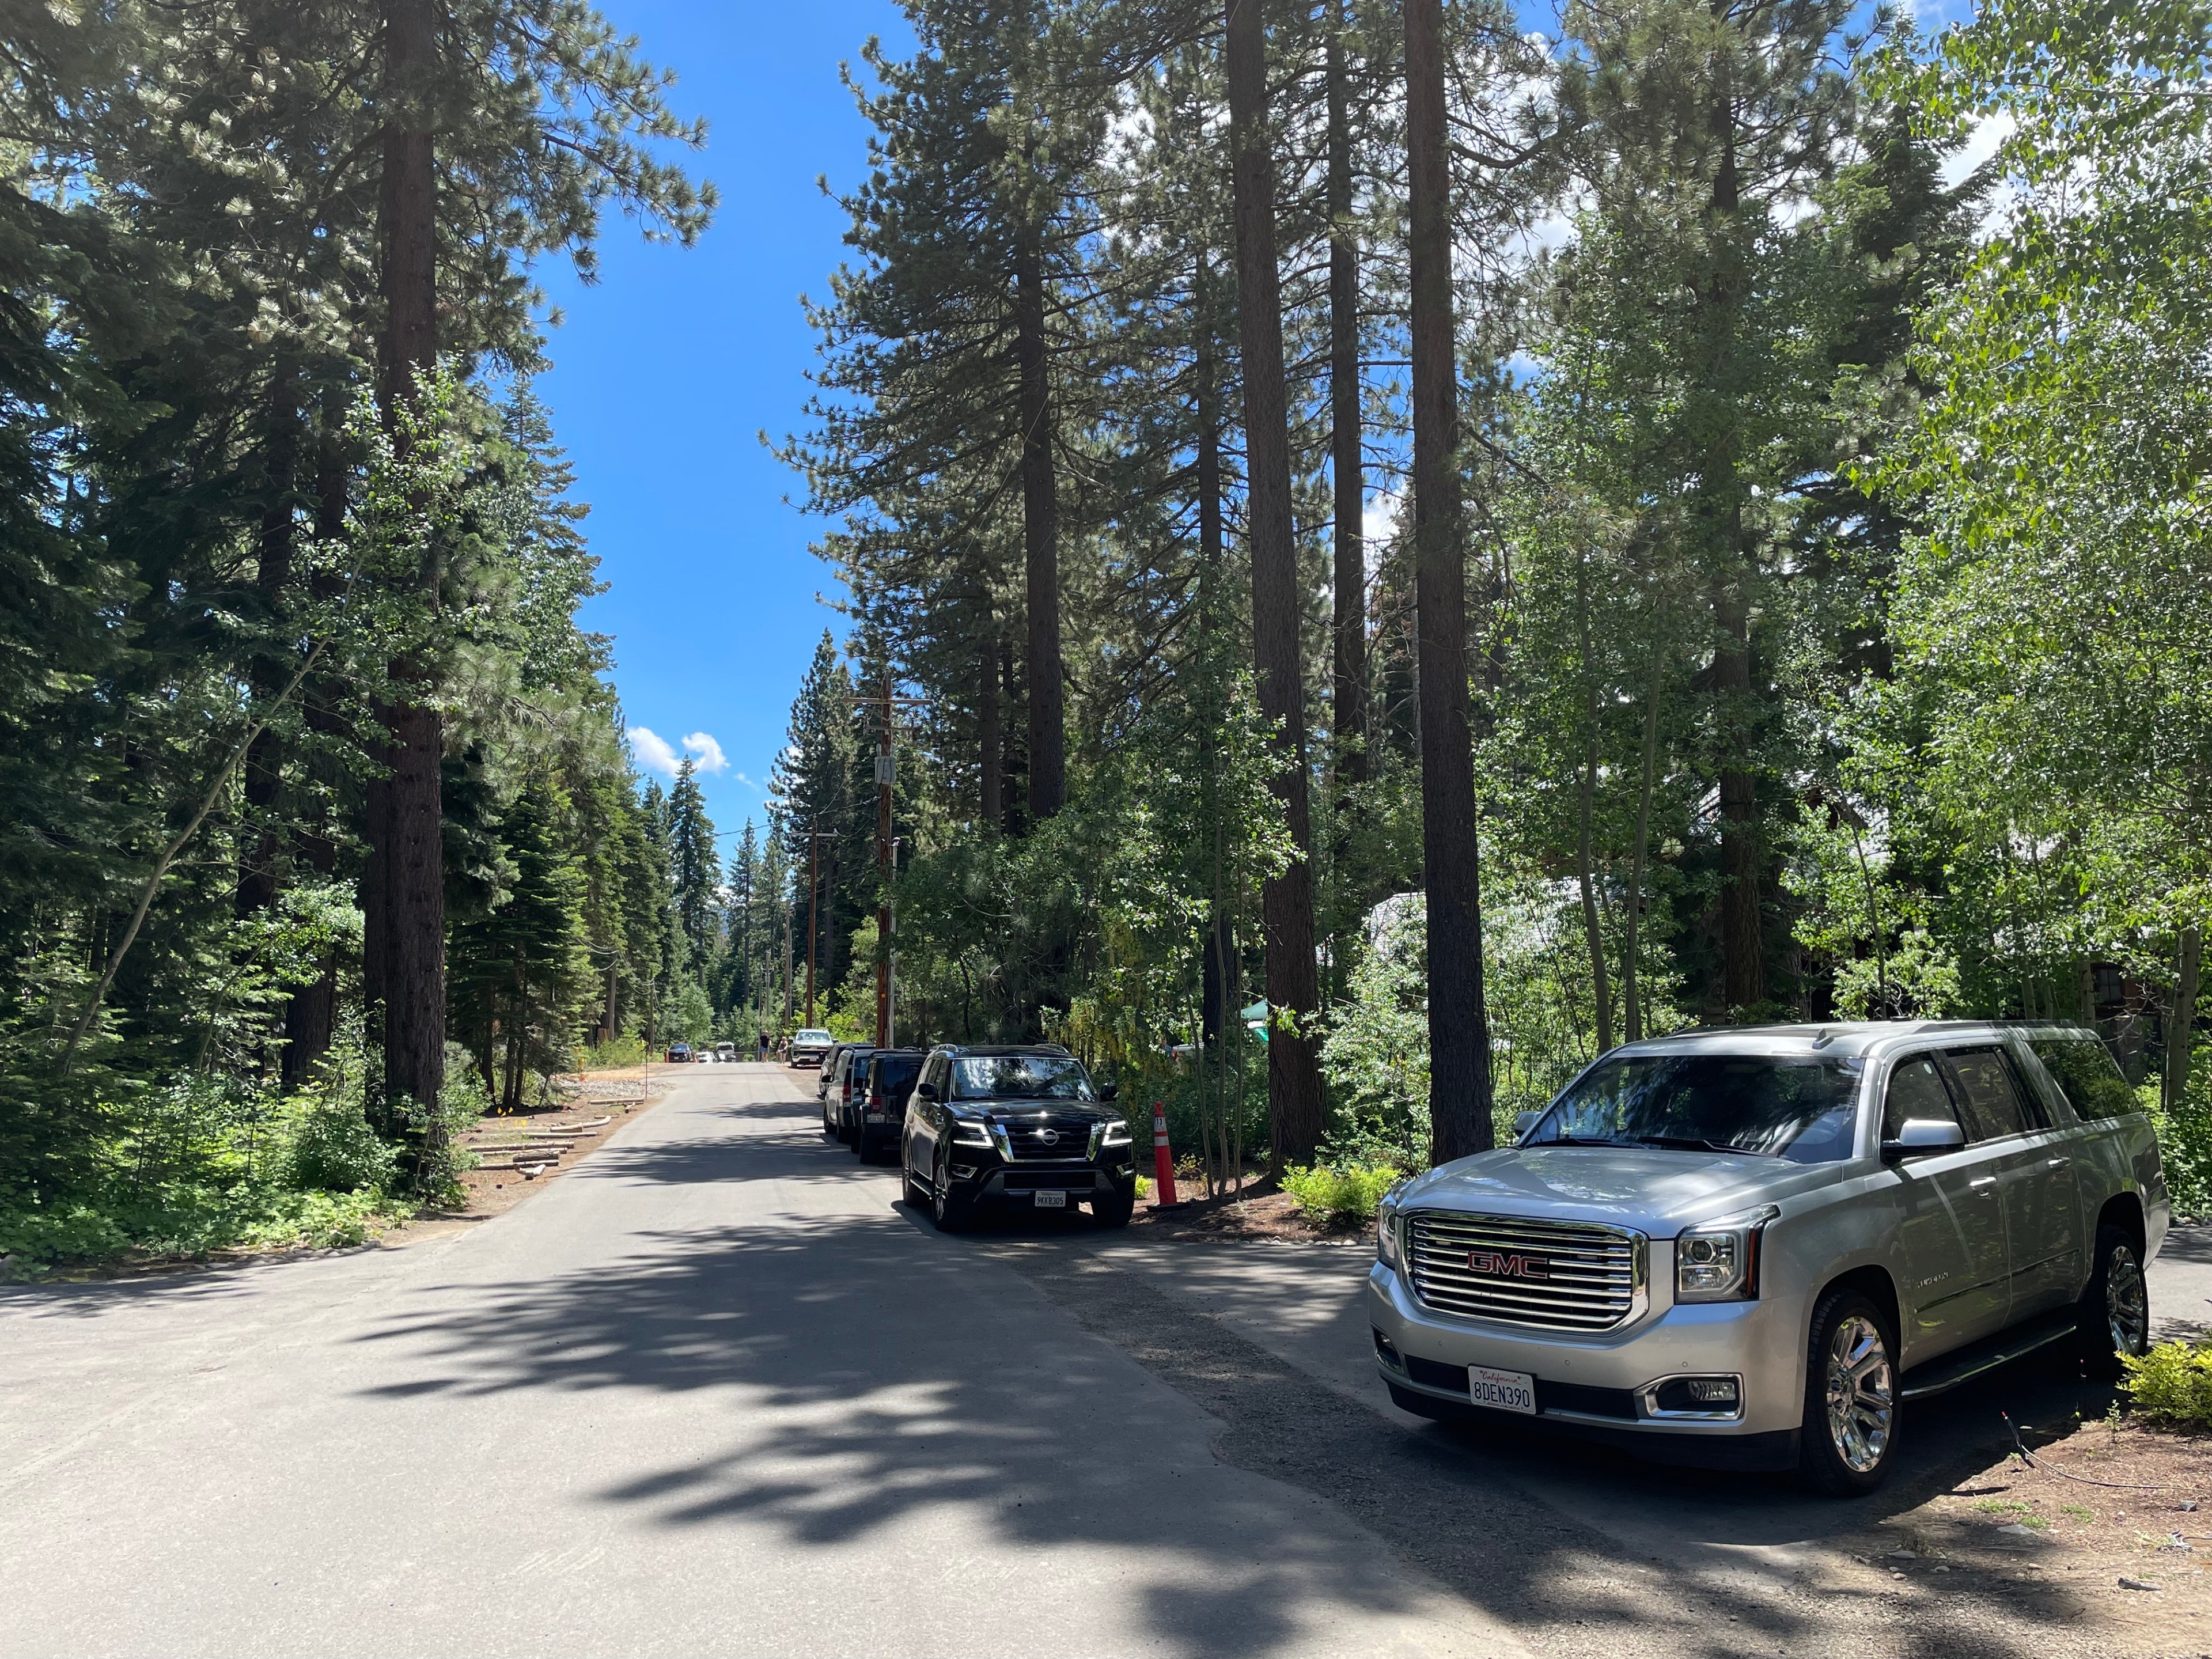 The image shows a paved street lined with tall trees on both sides and several parked cars, including a silver GMC SUV in the foreground on a sunny day.